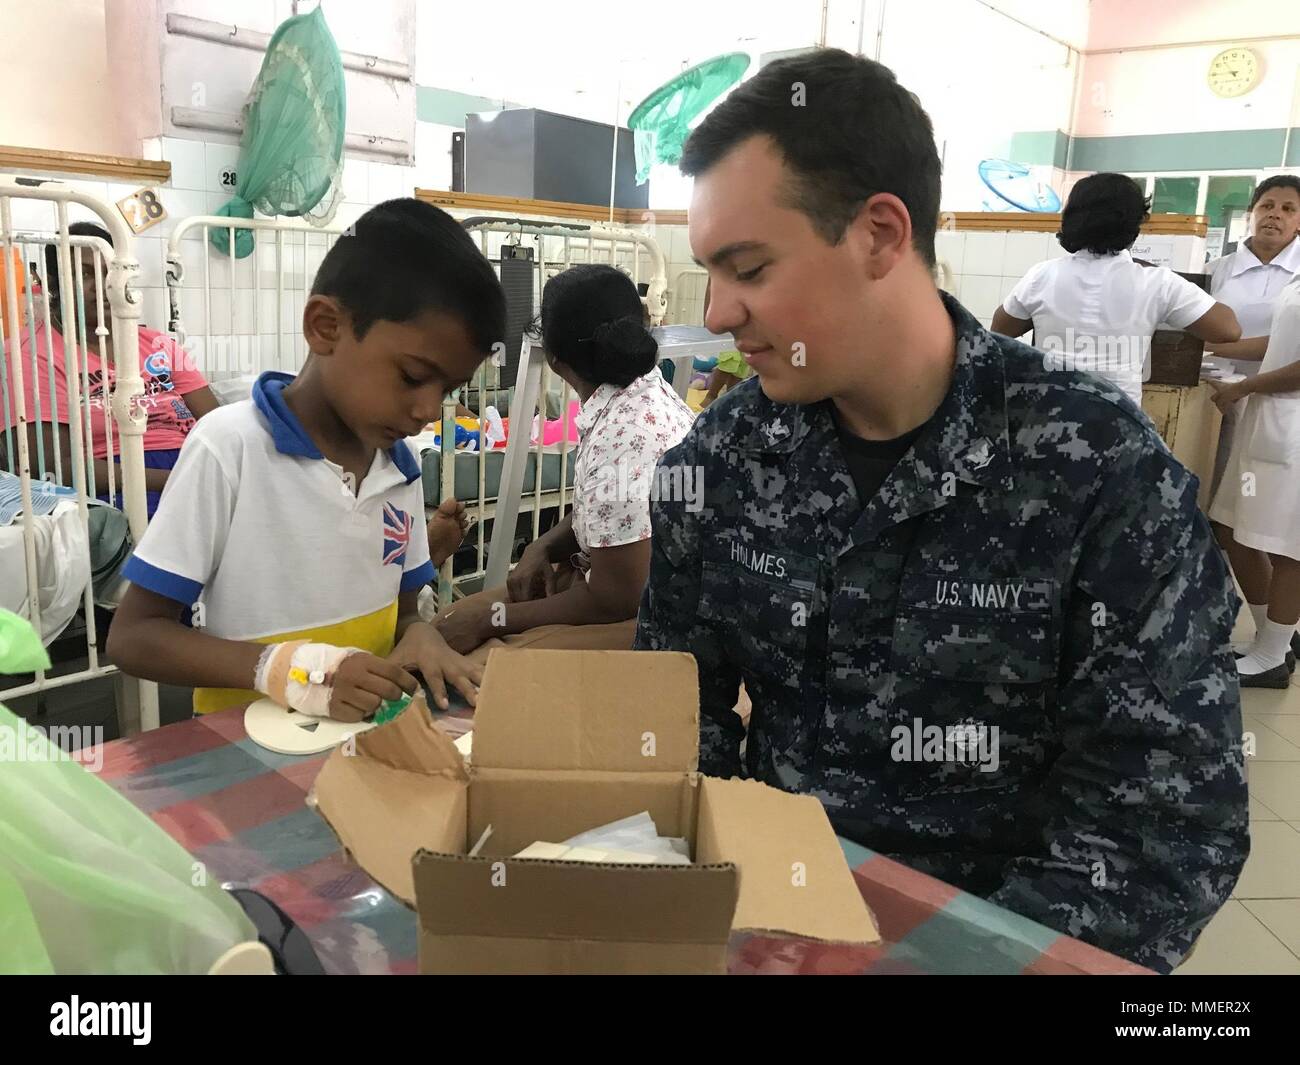 171029-N-OU681-0004 COLOMBO, Sri Lanka (Oct. 29, 2017) Information Systems Technician 3rd Class Joe Holmes, assigned to Ticonderoga-class guided-missile cruiser USS Princeton (CG 59), does crafts with a boy at Lady Ridgeway Hospital in Colombo, Sri Lanka, during a volunteer event with Nimitz Carrier Strike Group (CSG). Nimitz CSG is on a regularly scheduled deployment in the 7th Fleet area of responsibility in support of maritime security operations and theater security cooperation efforts. (U.S. Navy photo by Lt. j.g. Michelle Tucker/Released) Stock Photo